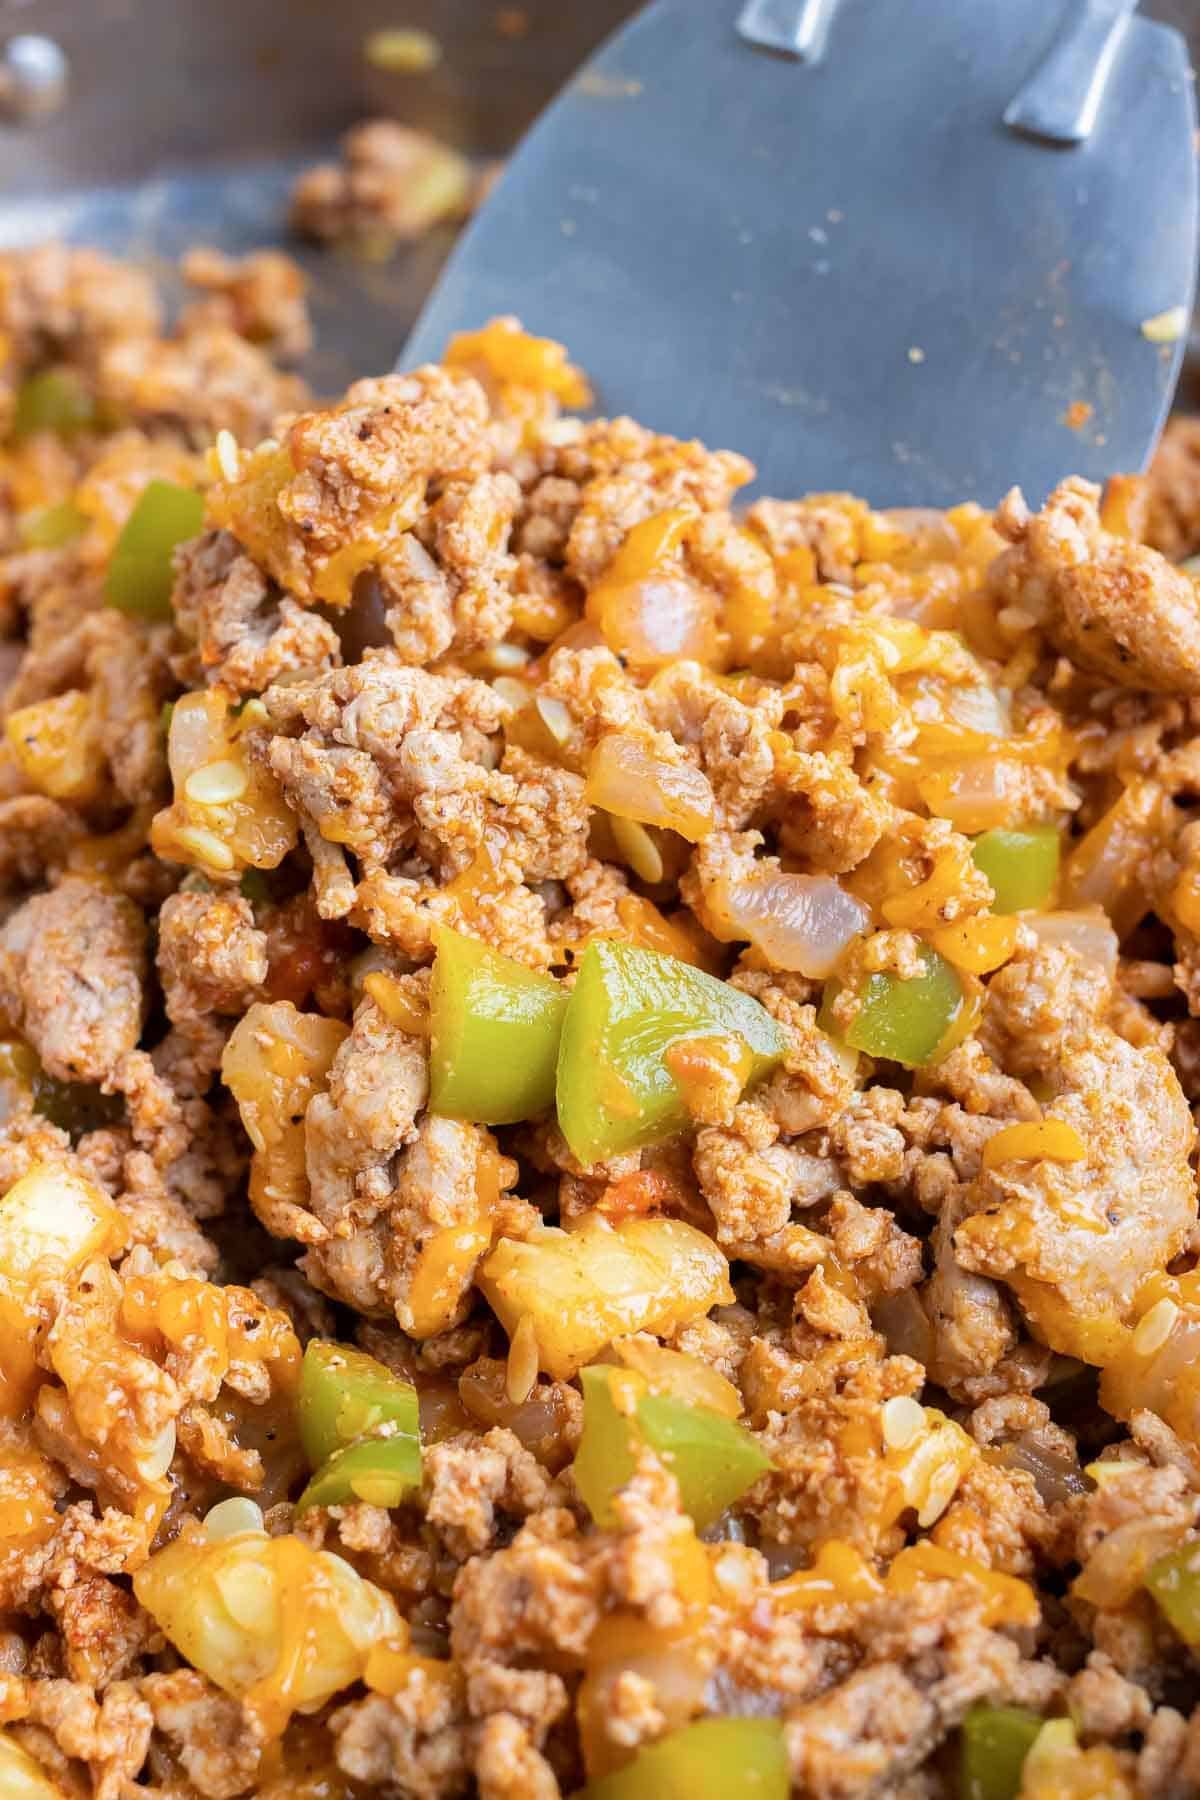 Ground meat taco filling with cheese and bell peppers.